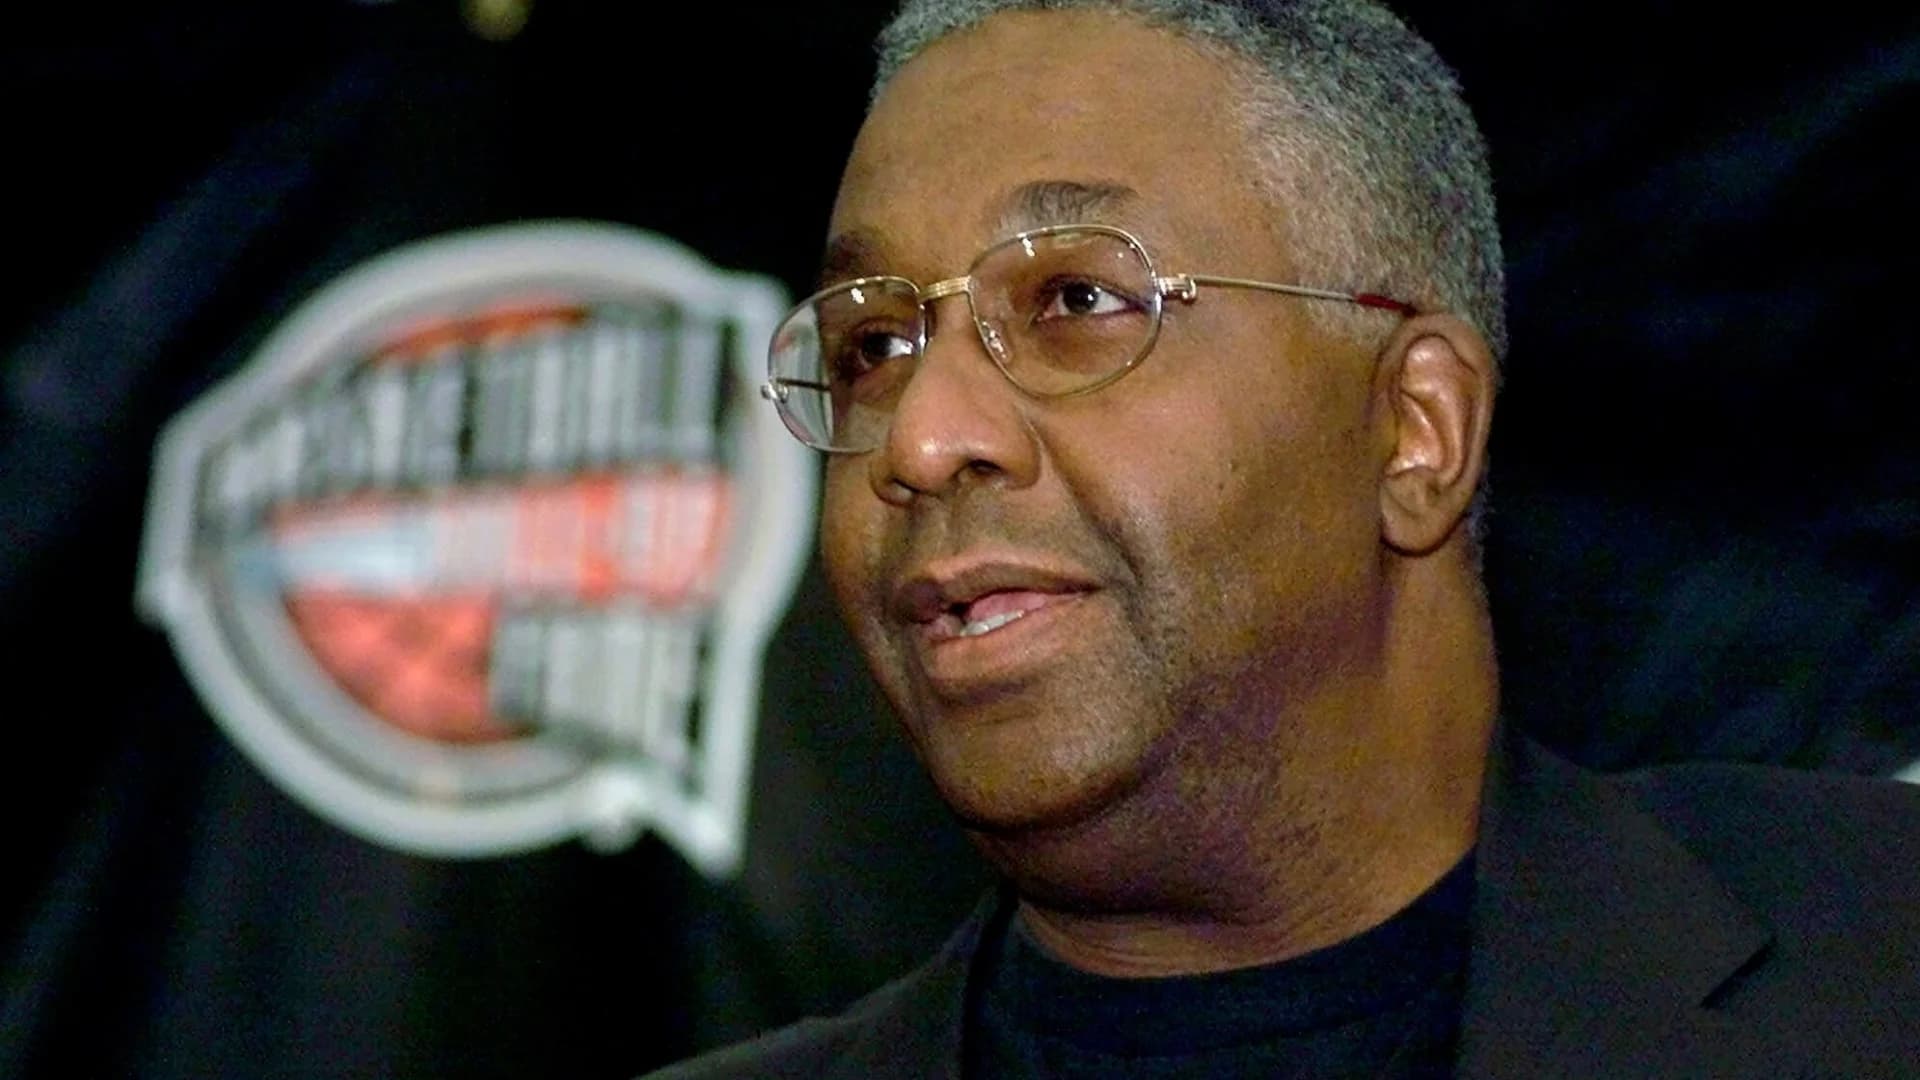 Coaching great John Thompson of Georgetown dead at 78